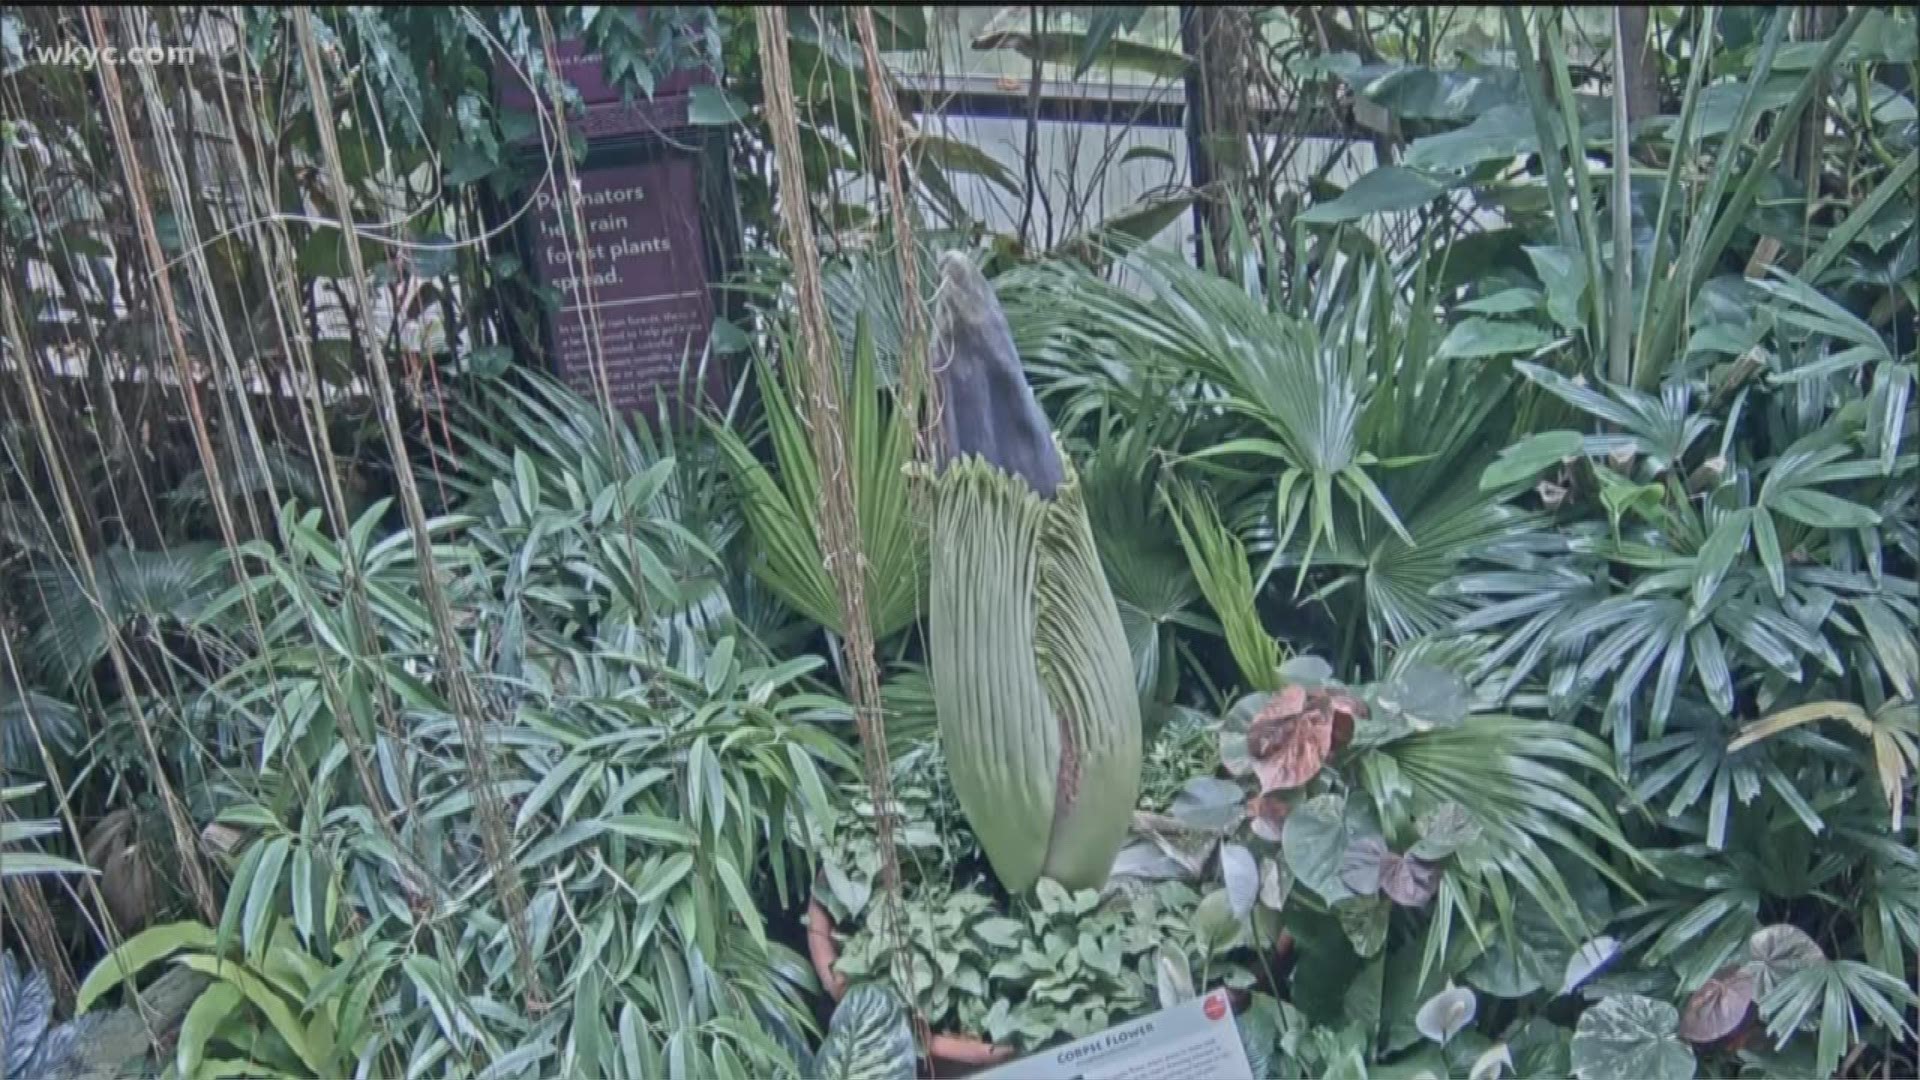 The public will get their first look at the bloom of the corpse flower inside The RainForest on Wednesday morning starting at 10 a.m.